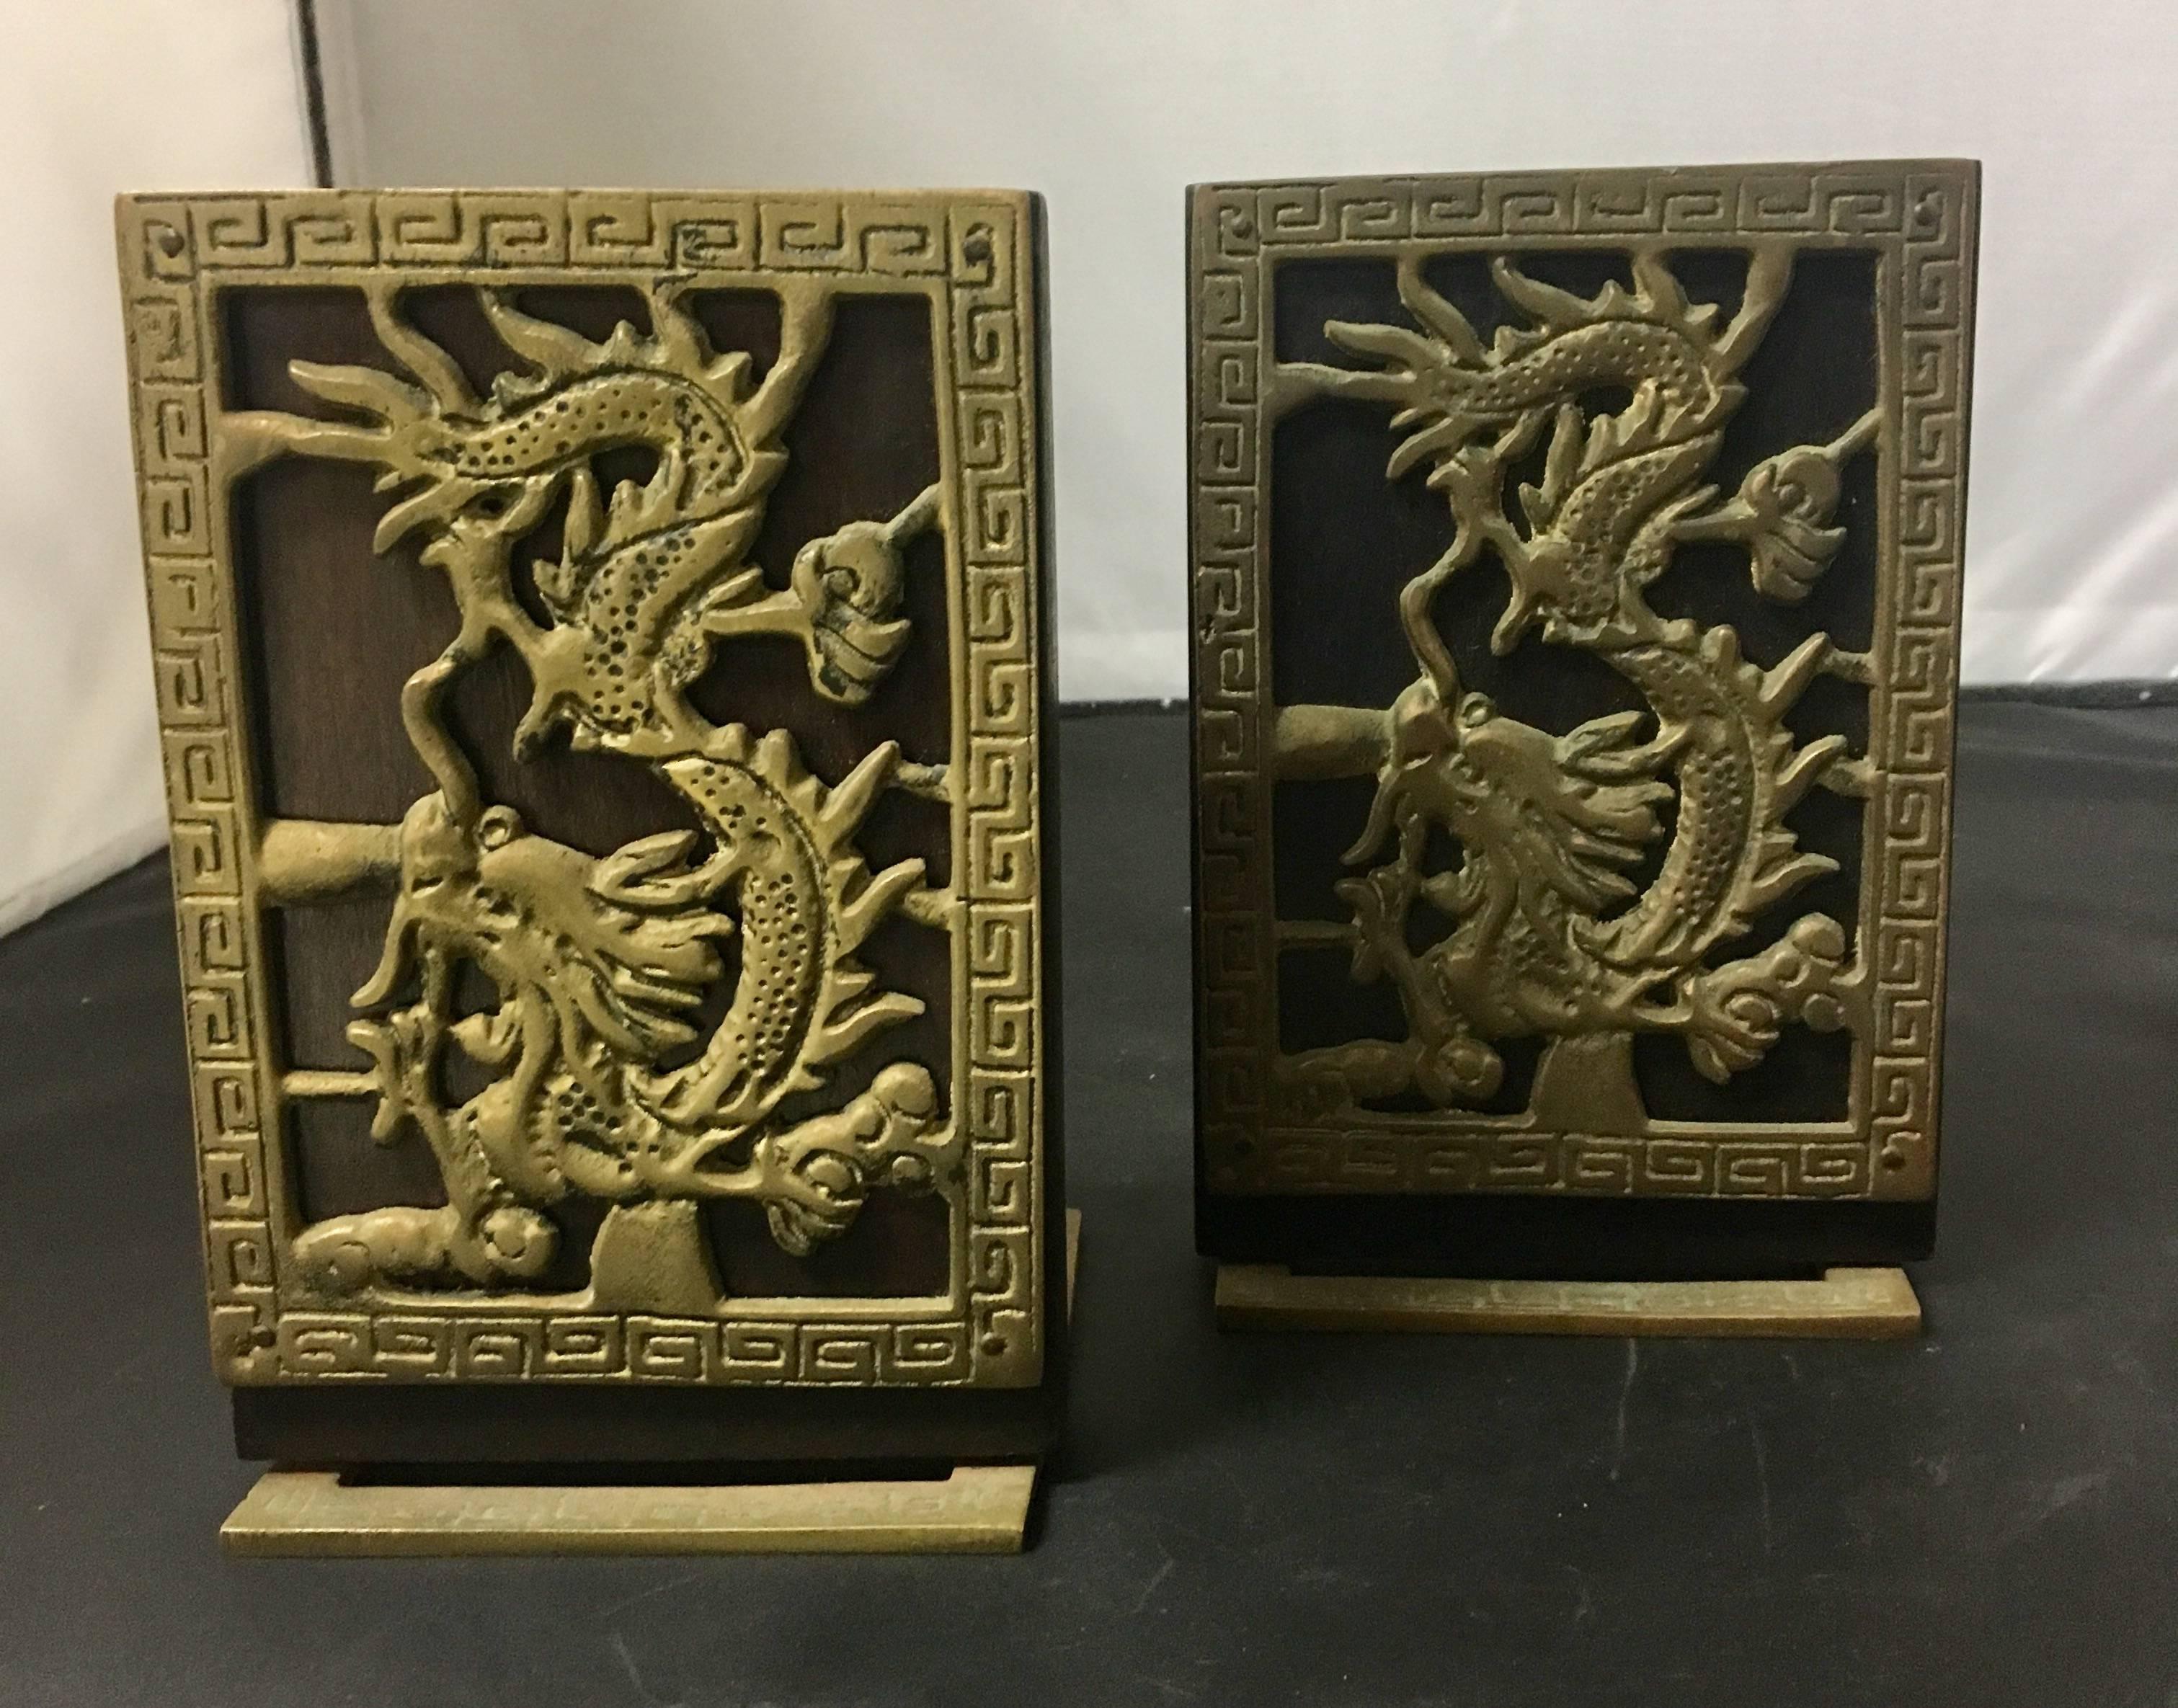 A nice pair of vintage bookends made of wood and brass with a Chinese dragon design.